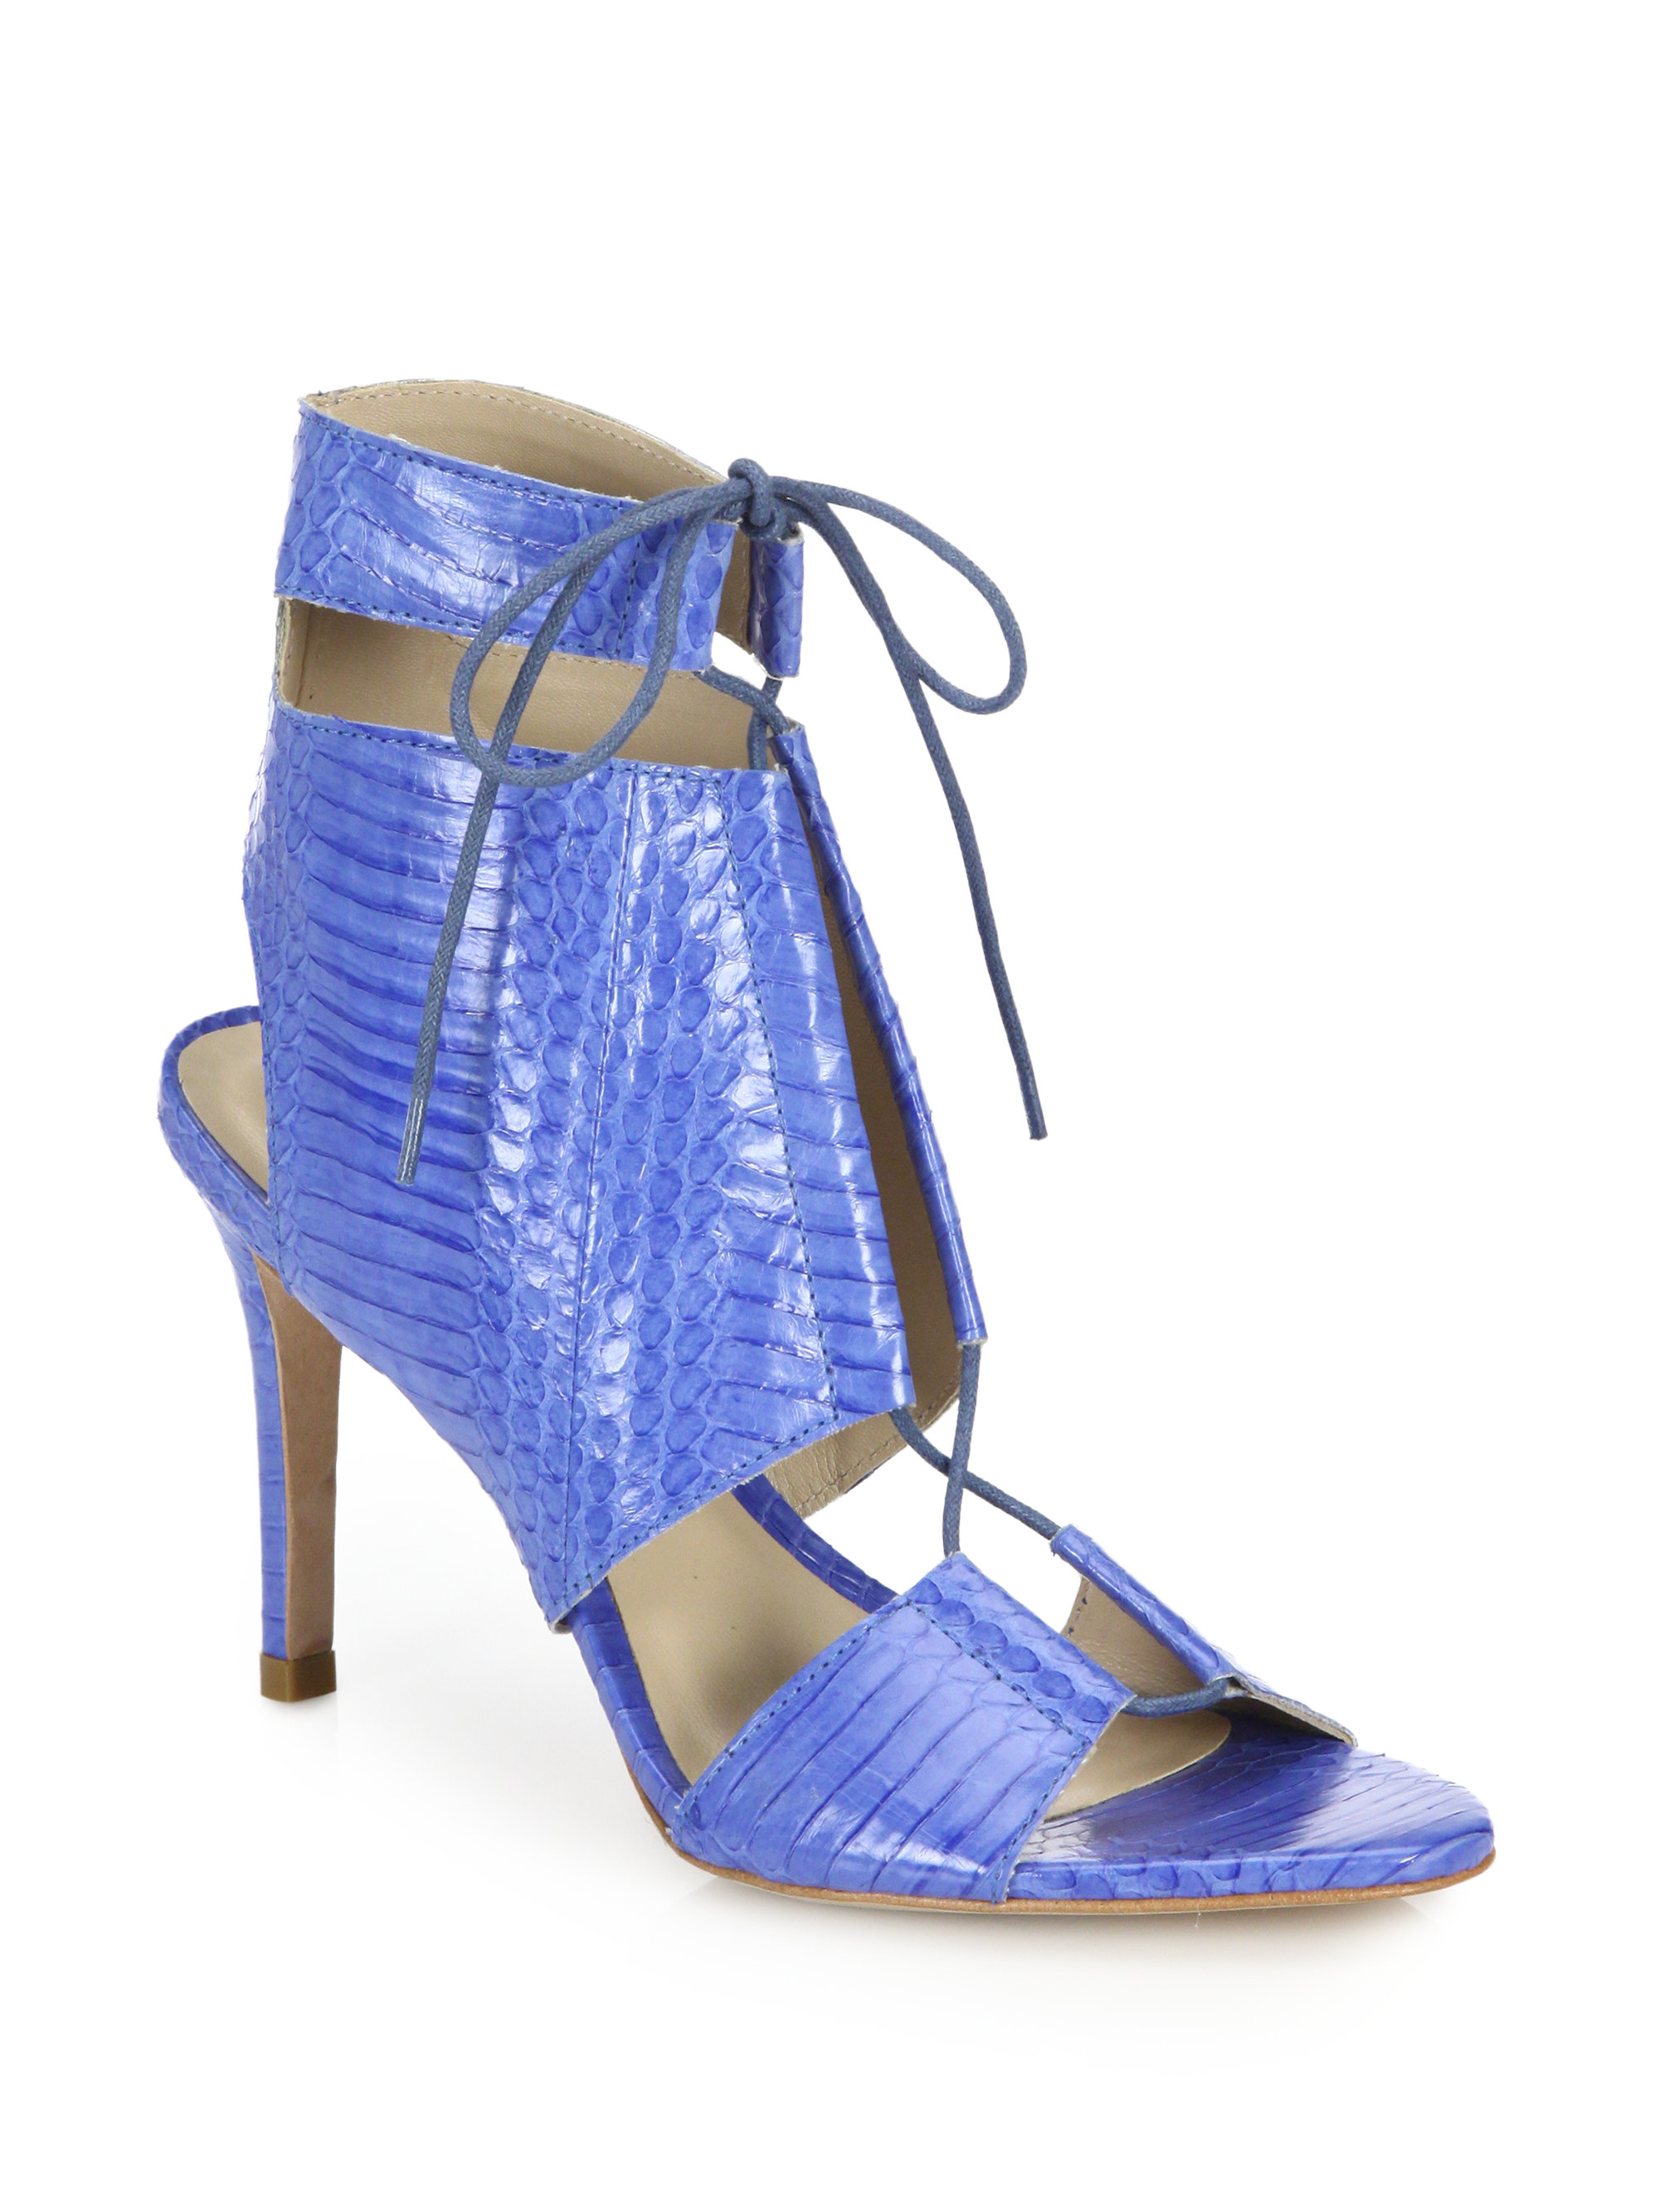 Loeffler Randall Scarlet Anaconda Lace-up Leather Sandals in Blue - Lyst